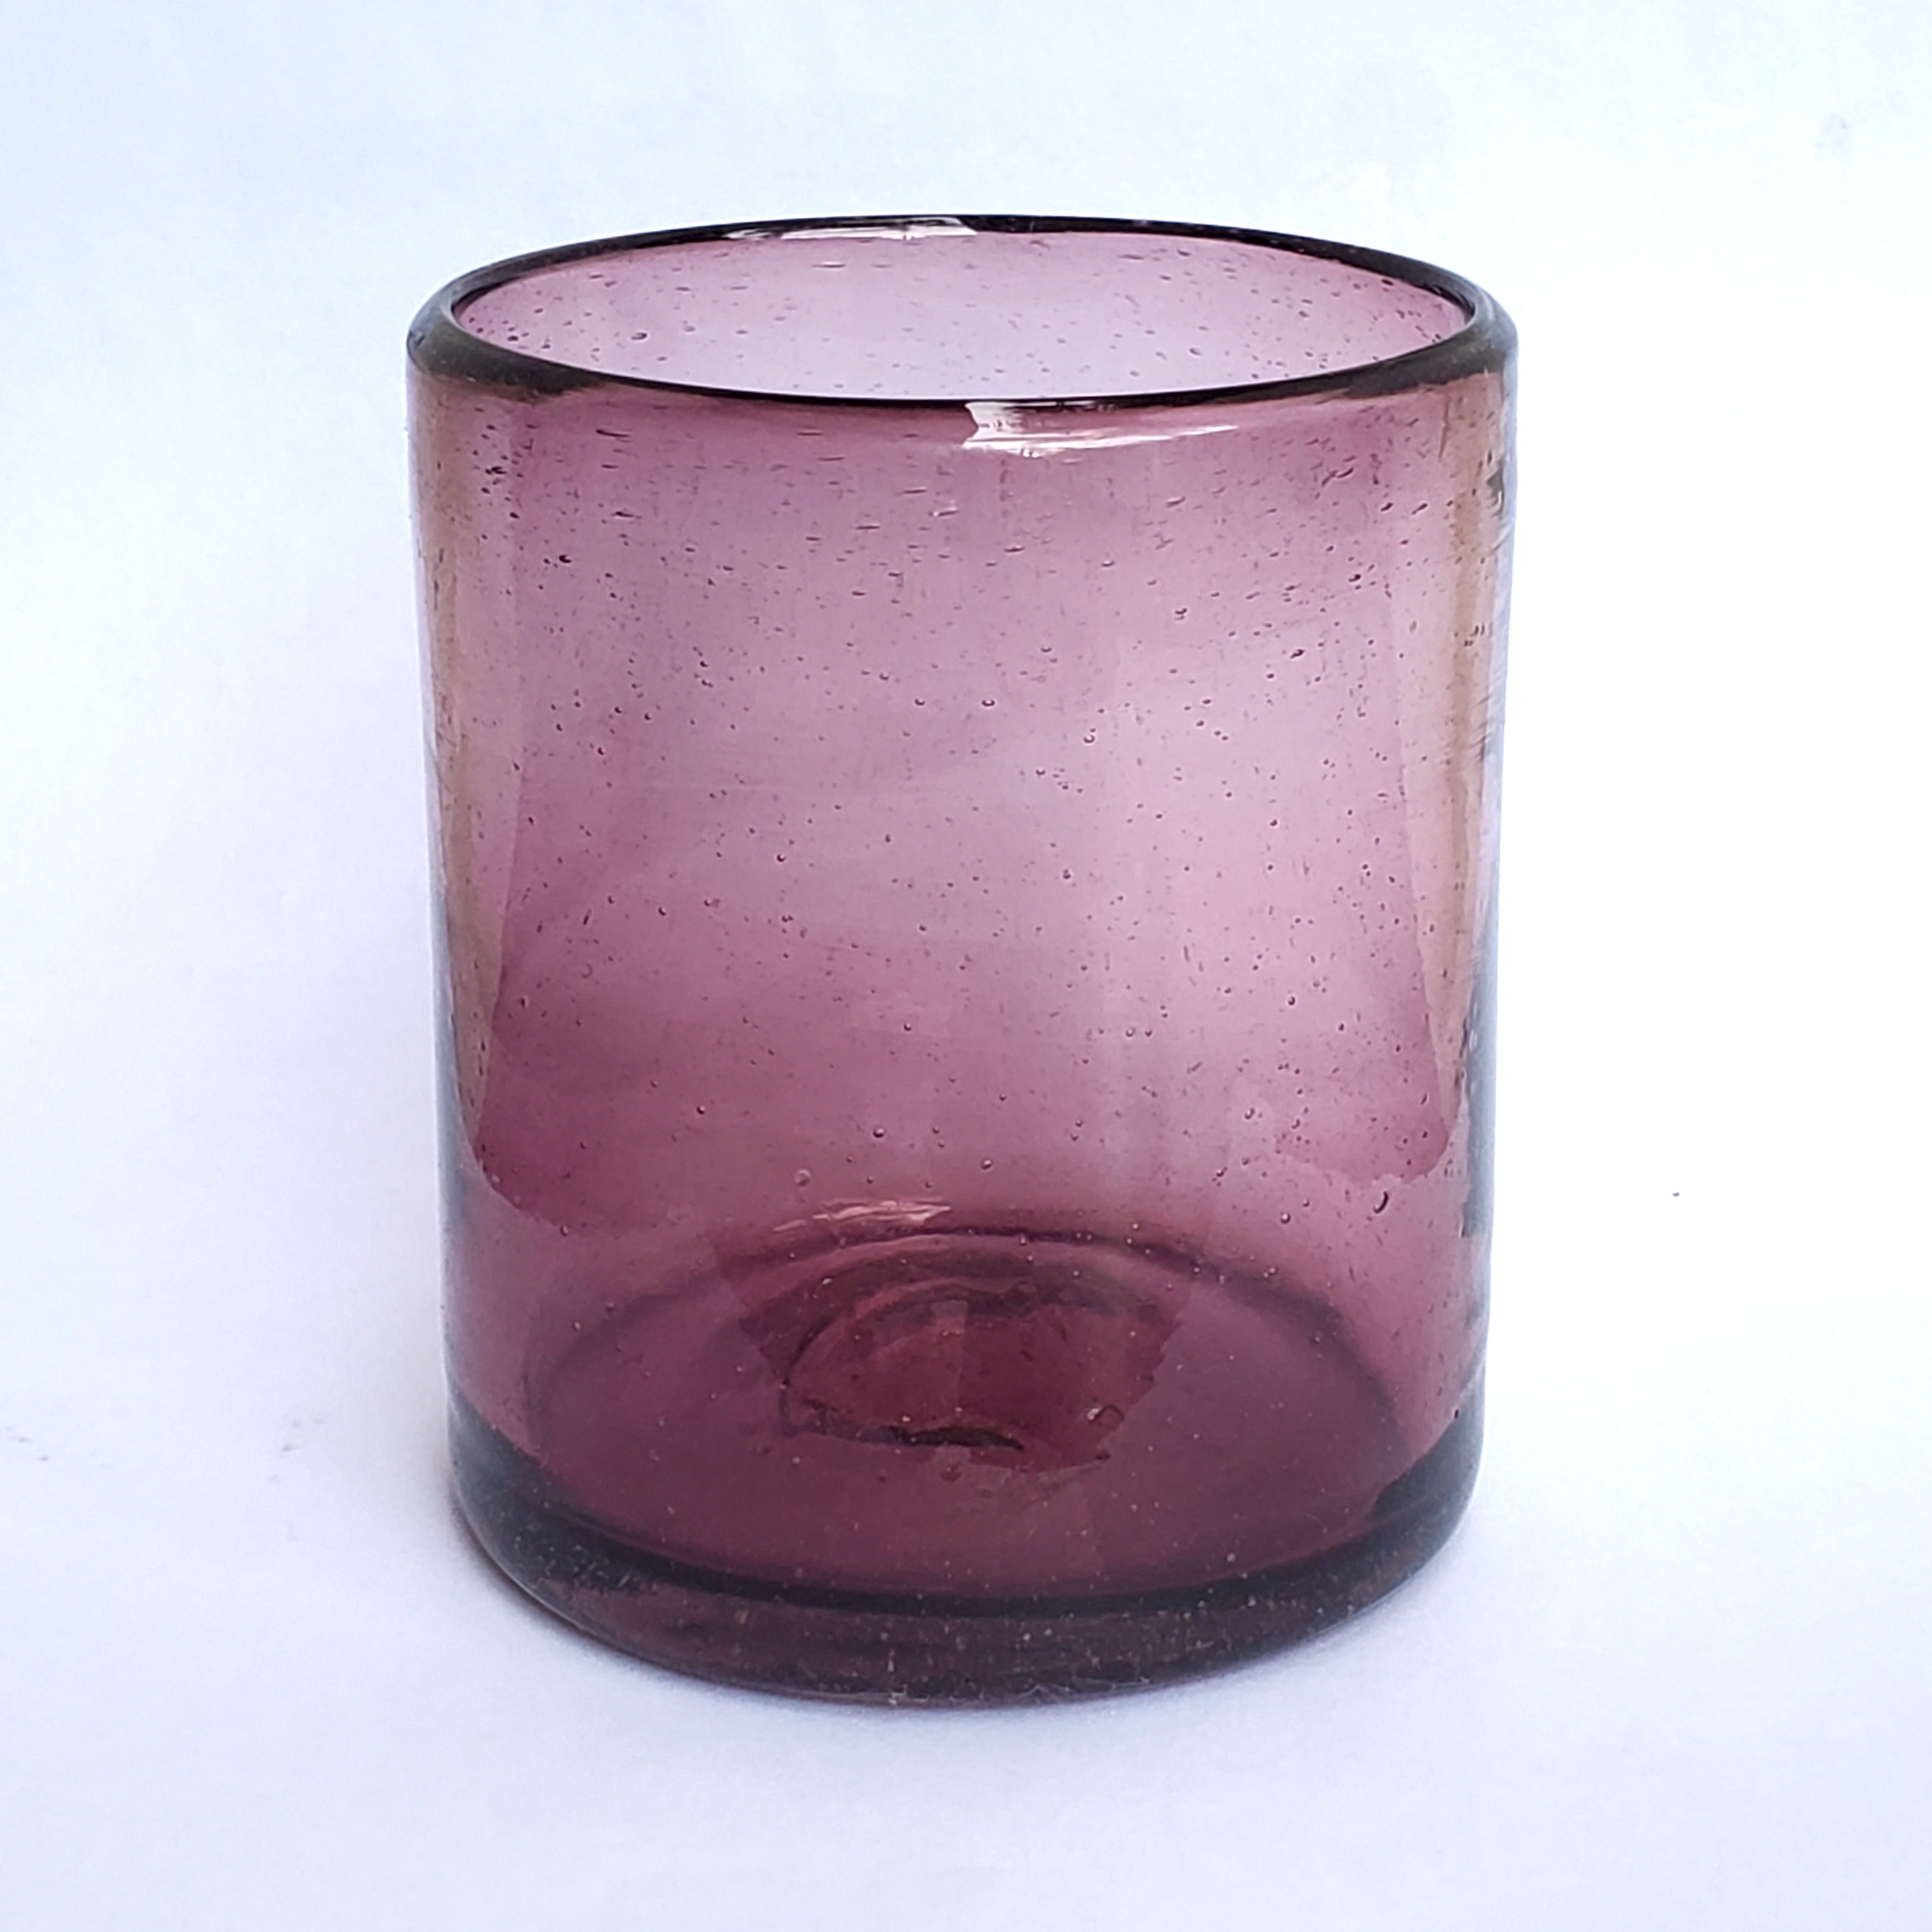 Wholesale MEXICAN GLASSWARE / Solid Amethyst 9 oz Short Tumblers  / Enhance your table setting with our beautiful Amethyst colored glasses.